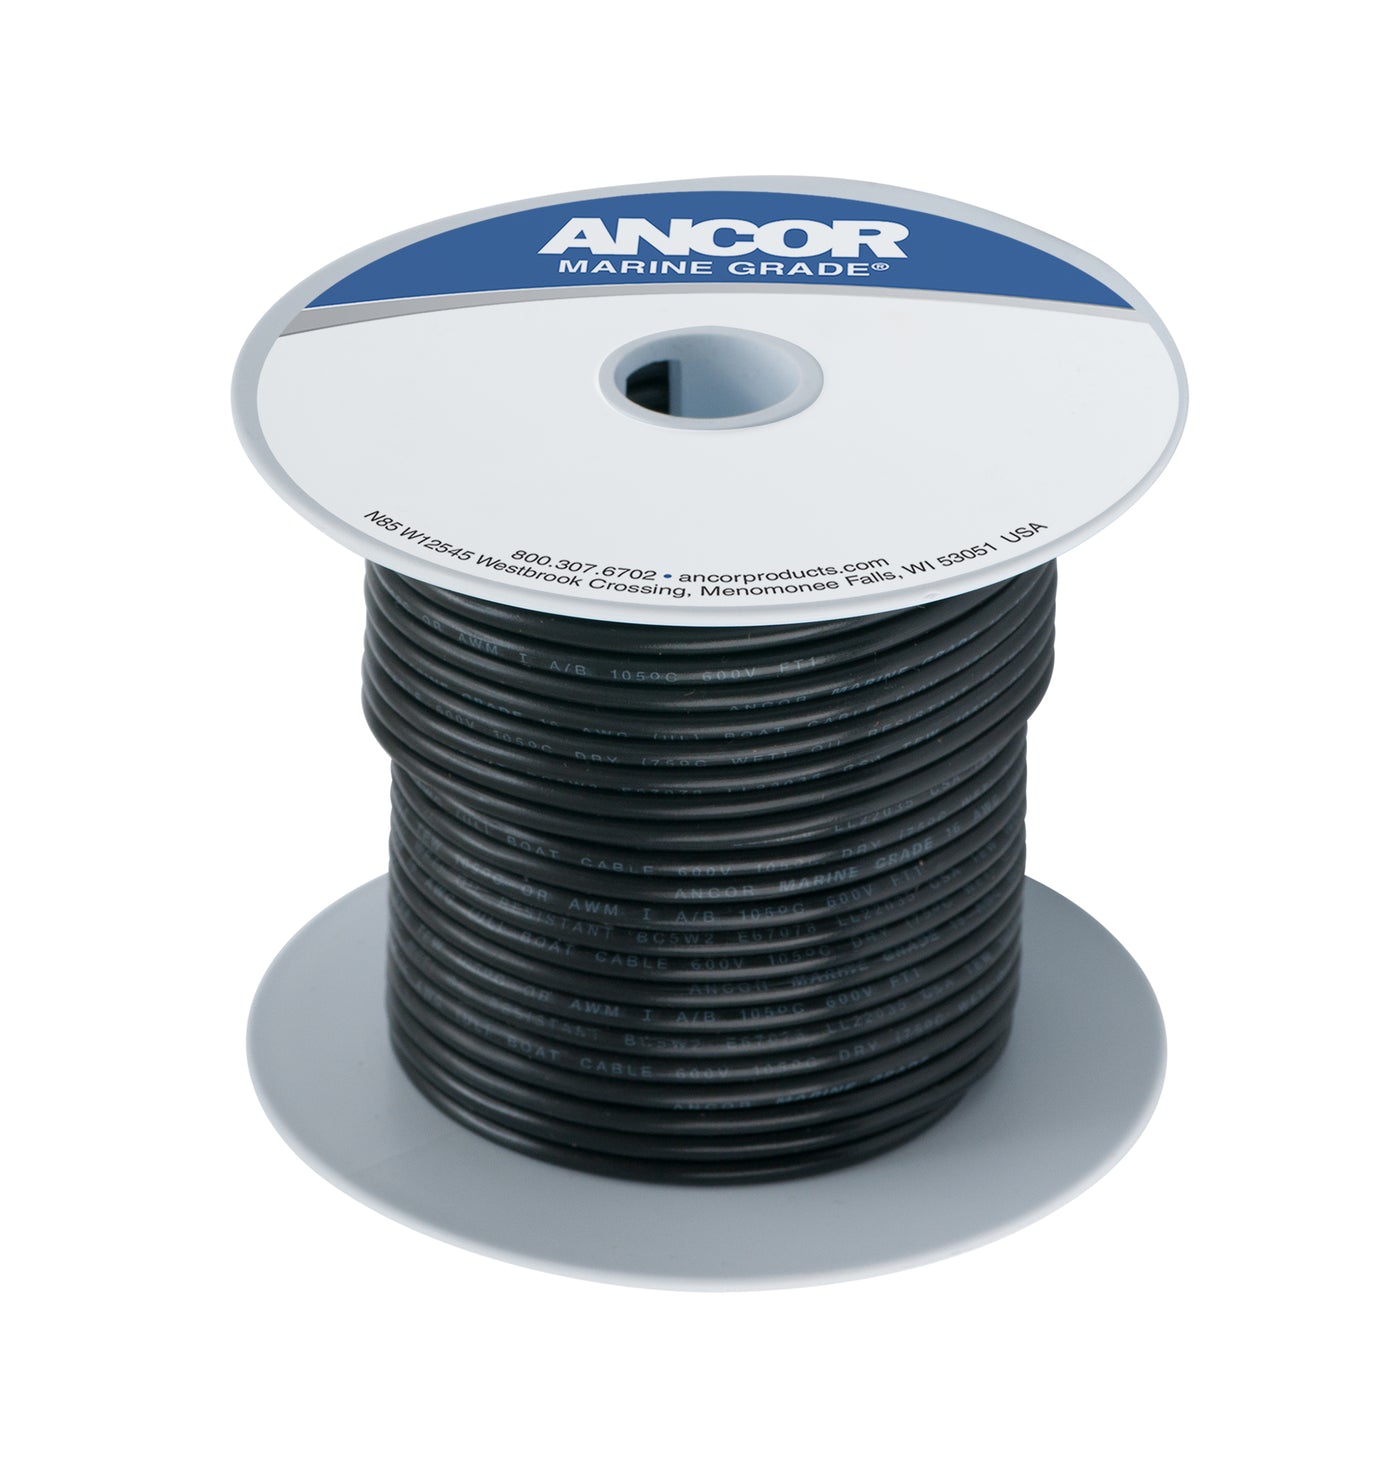 Ancor 111050 Tinned Copper Wire, 8 AWG (8mm²), Black - 500ft